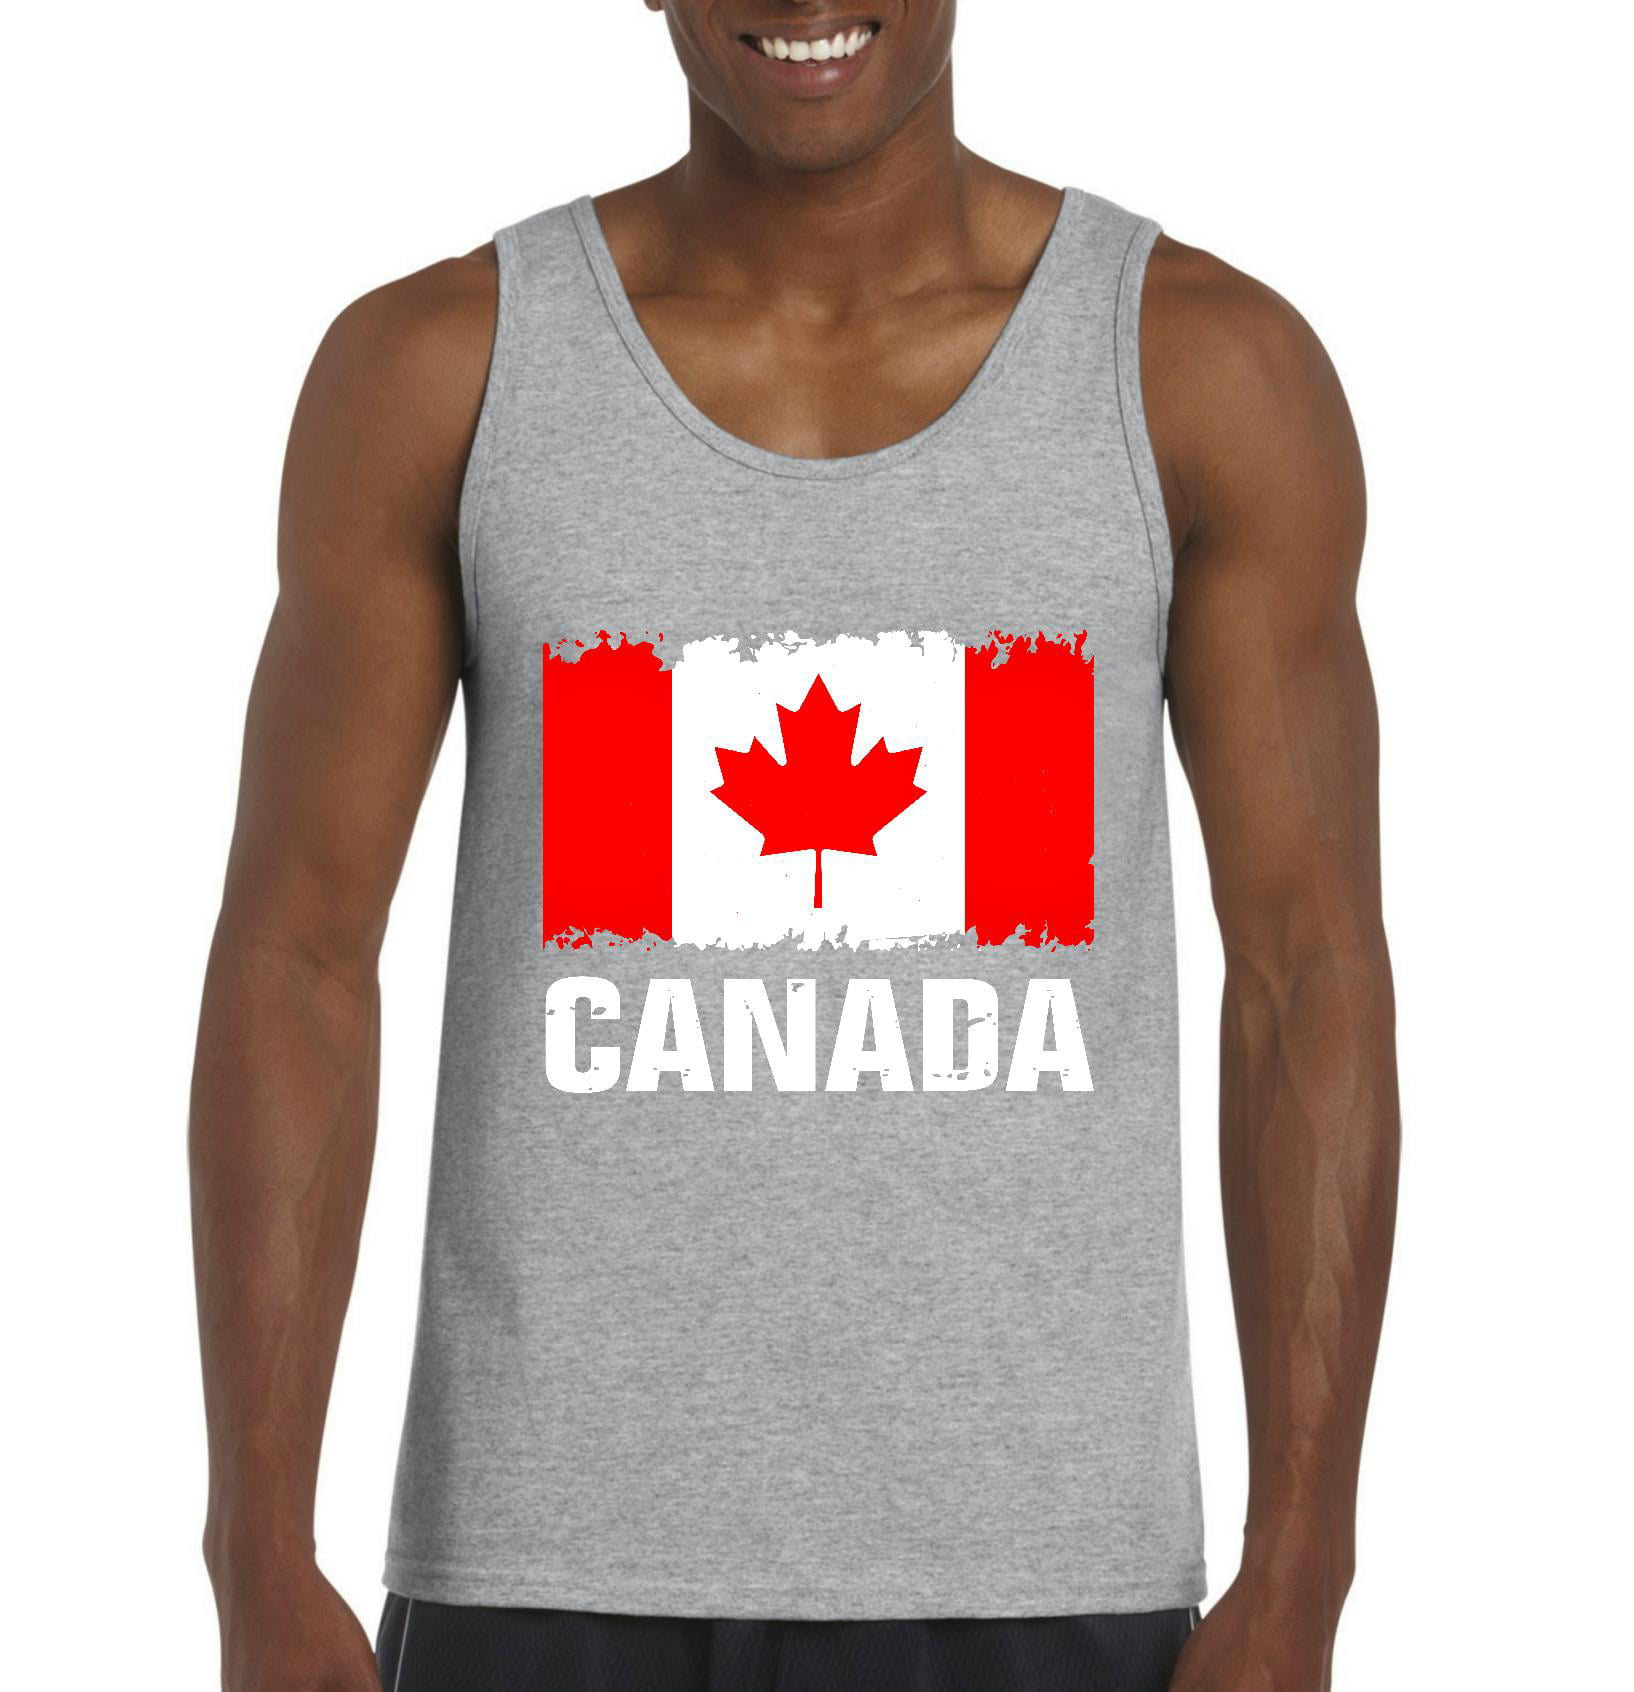 MmF Men's Tank Top for Men, up to Men Size 3XL Canada Flag